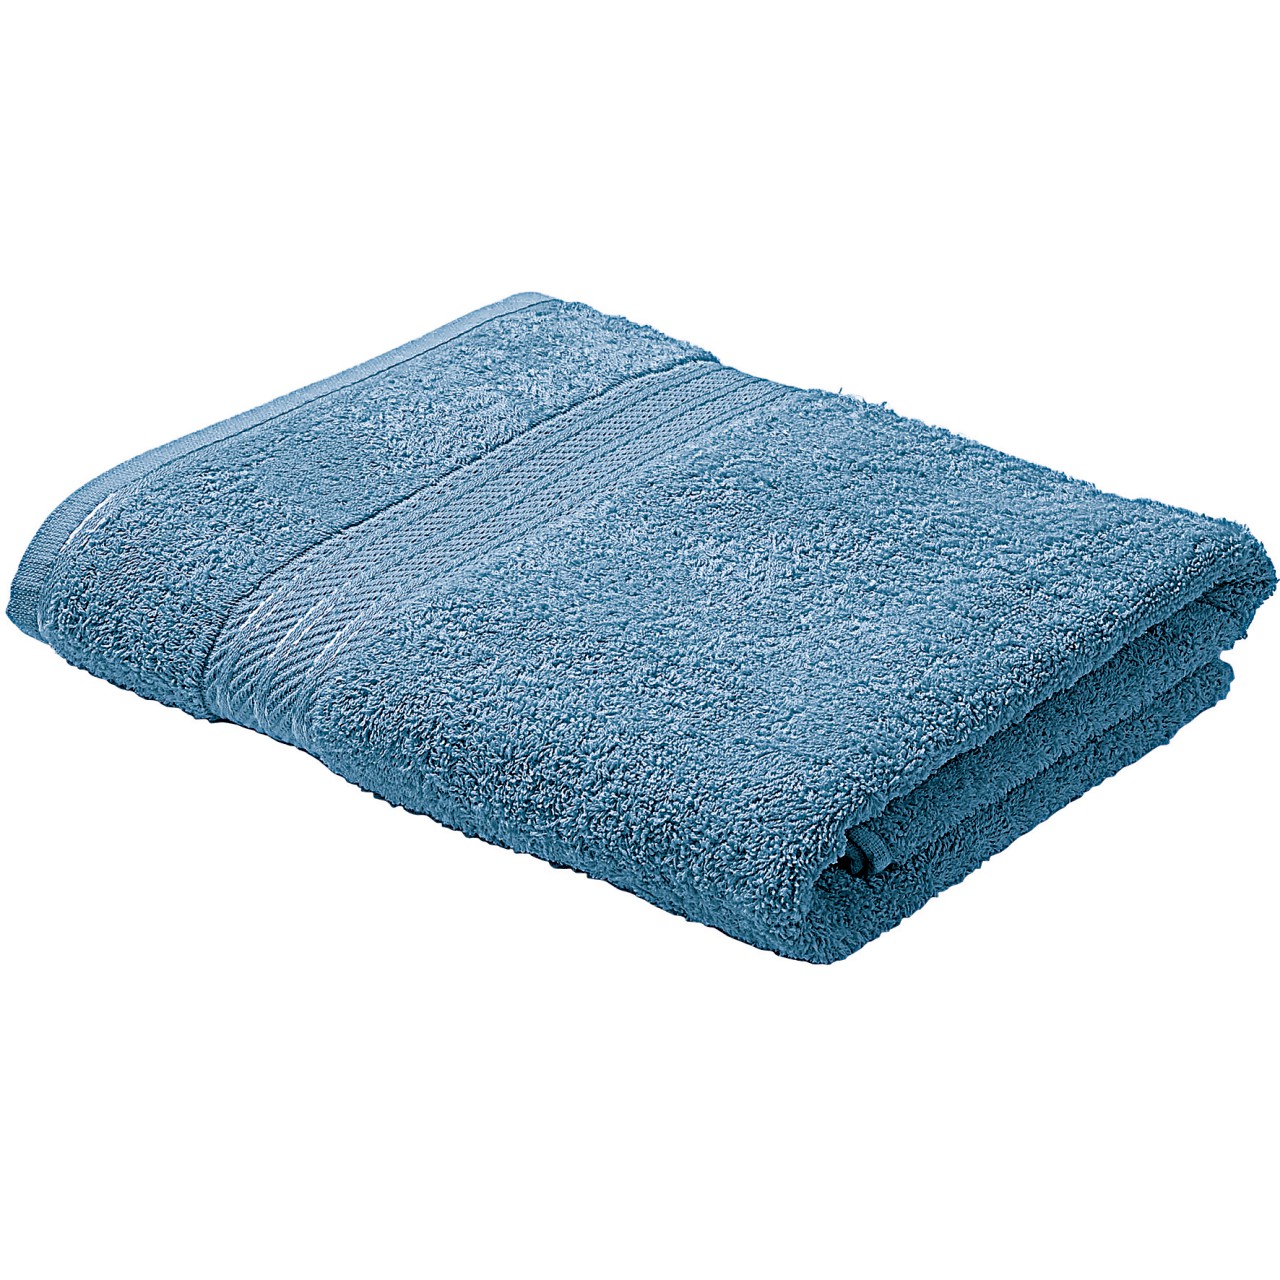 Supreme Cotton Turkish Towels - Buy One Get One Free